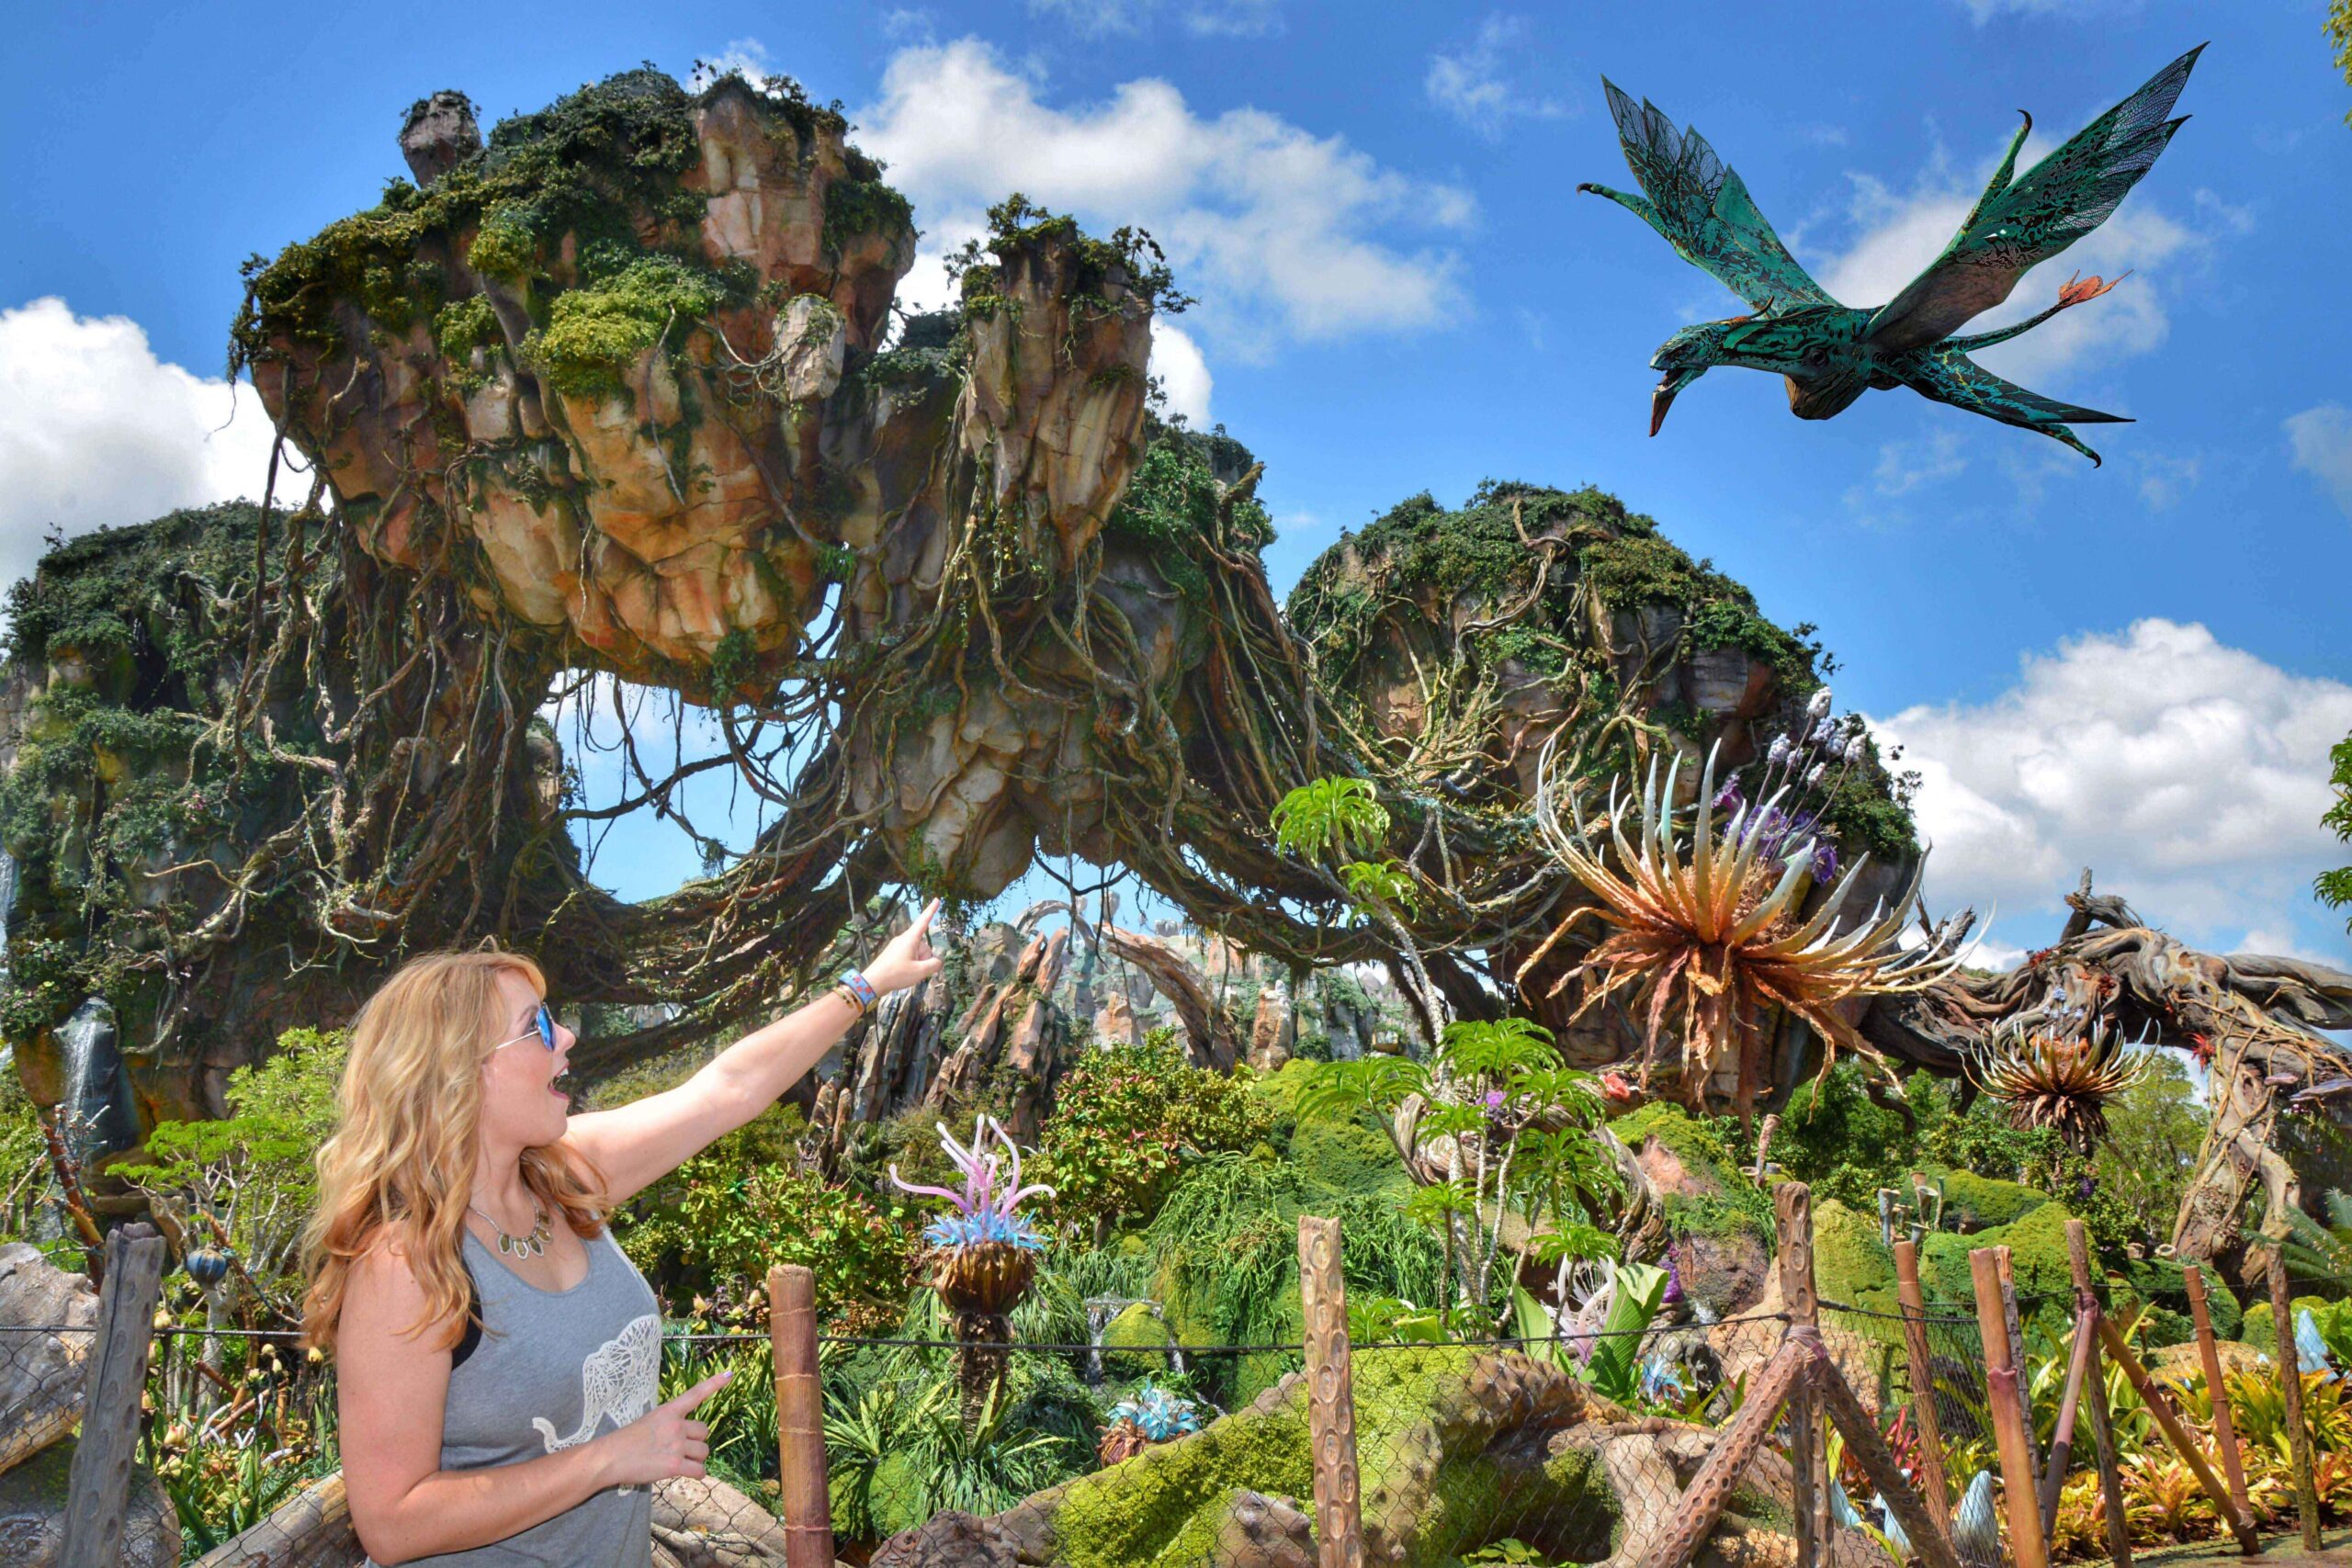 New Avatar Park Attractions Confirmed By Disney After Movie Success   Inside the Magic